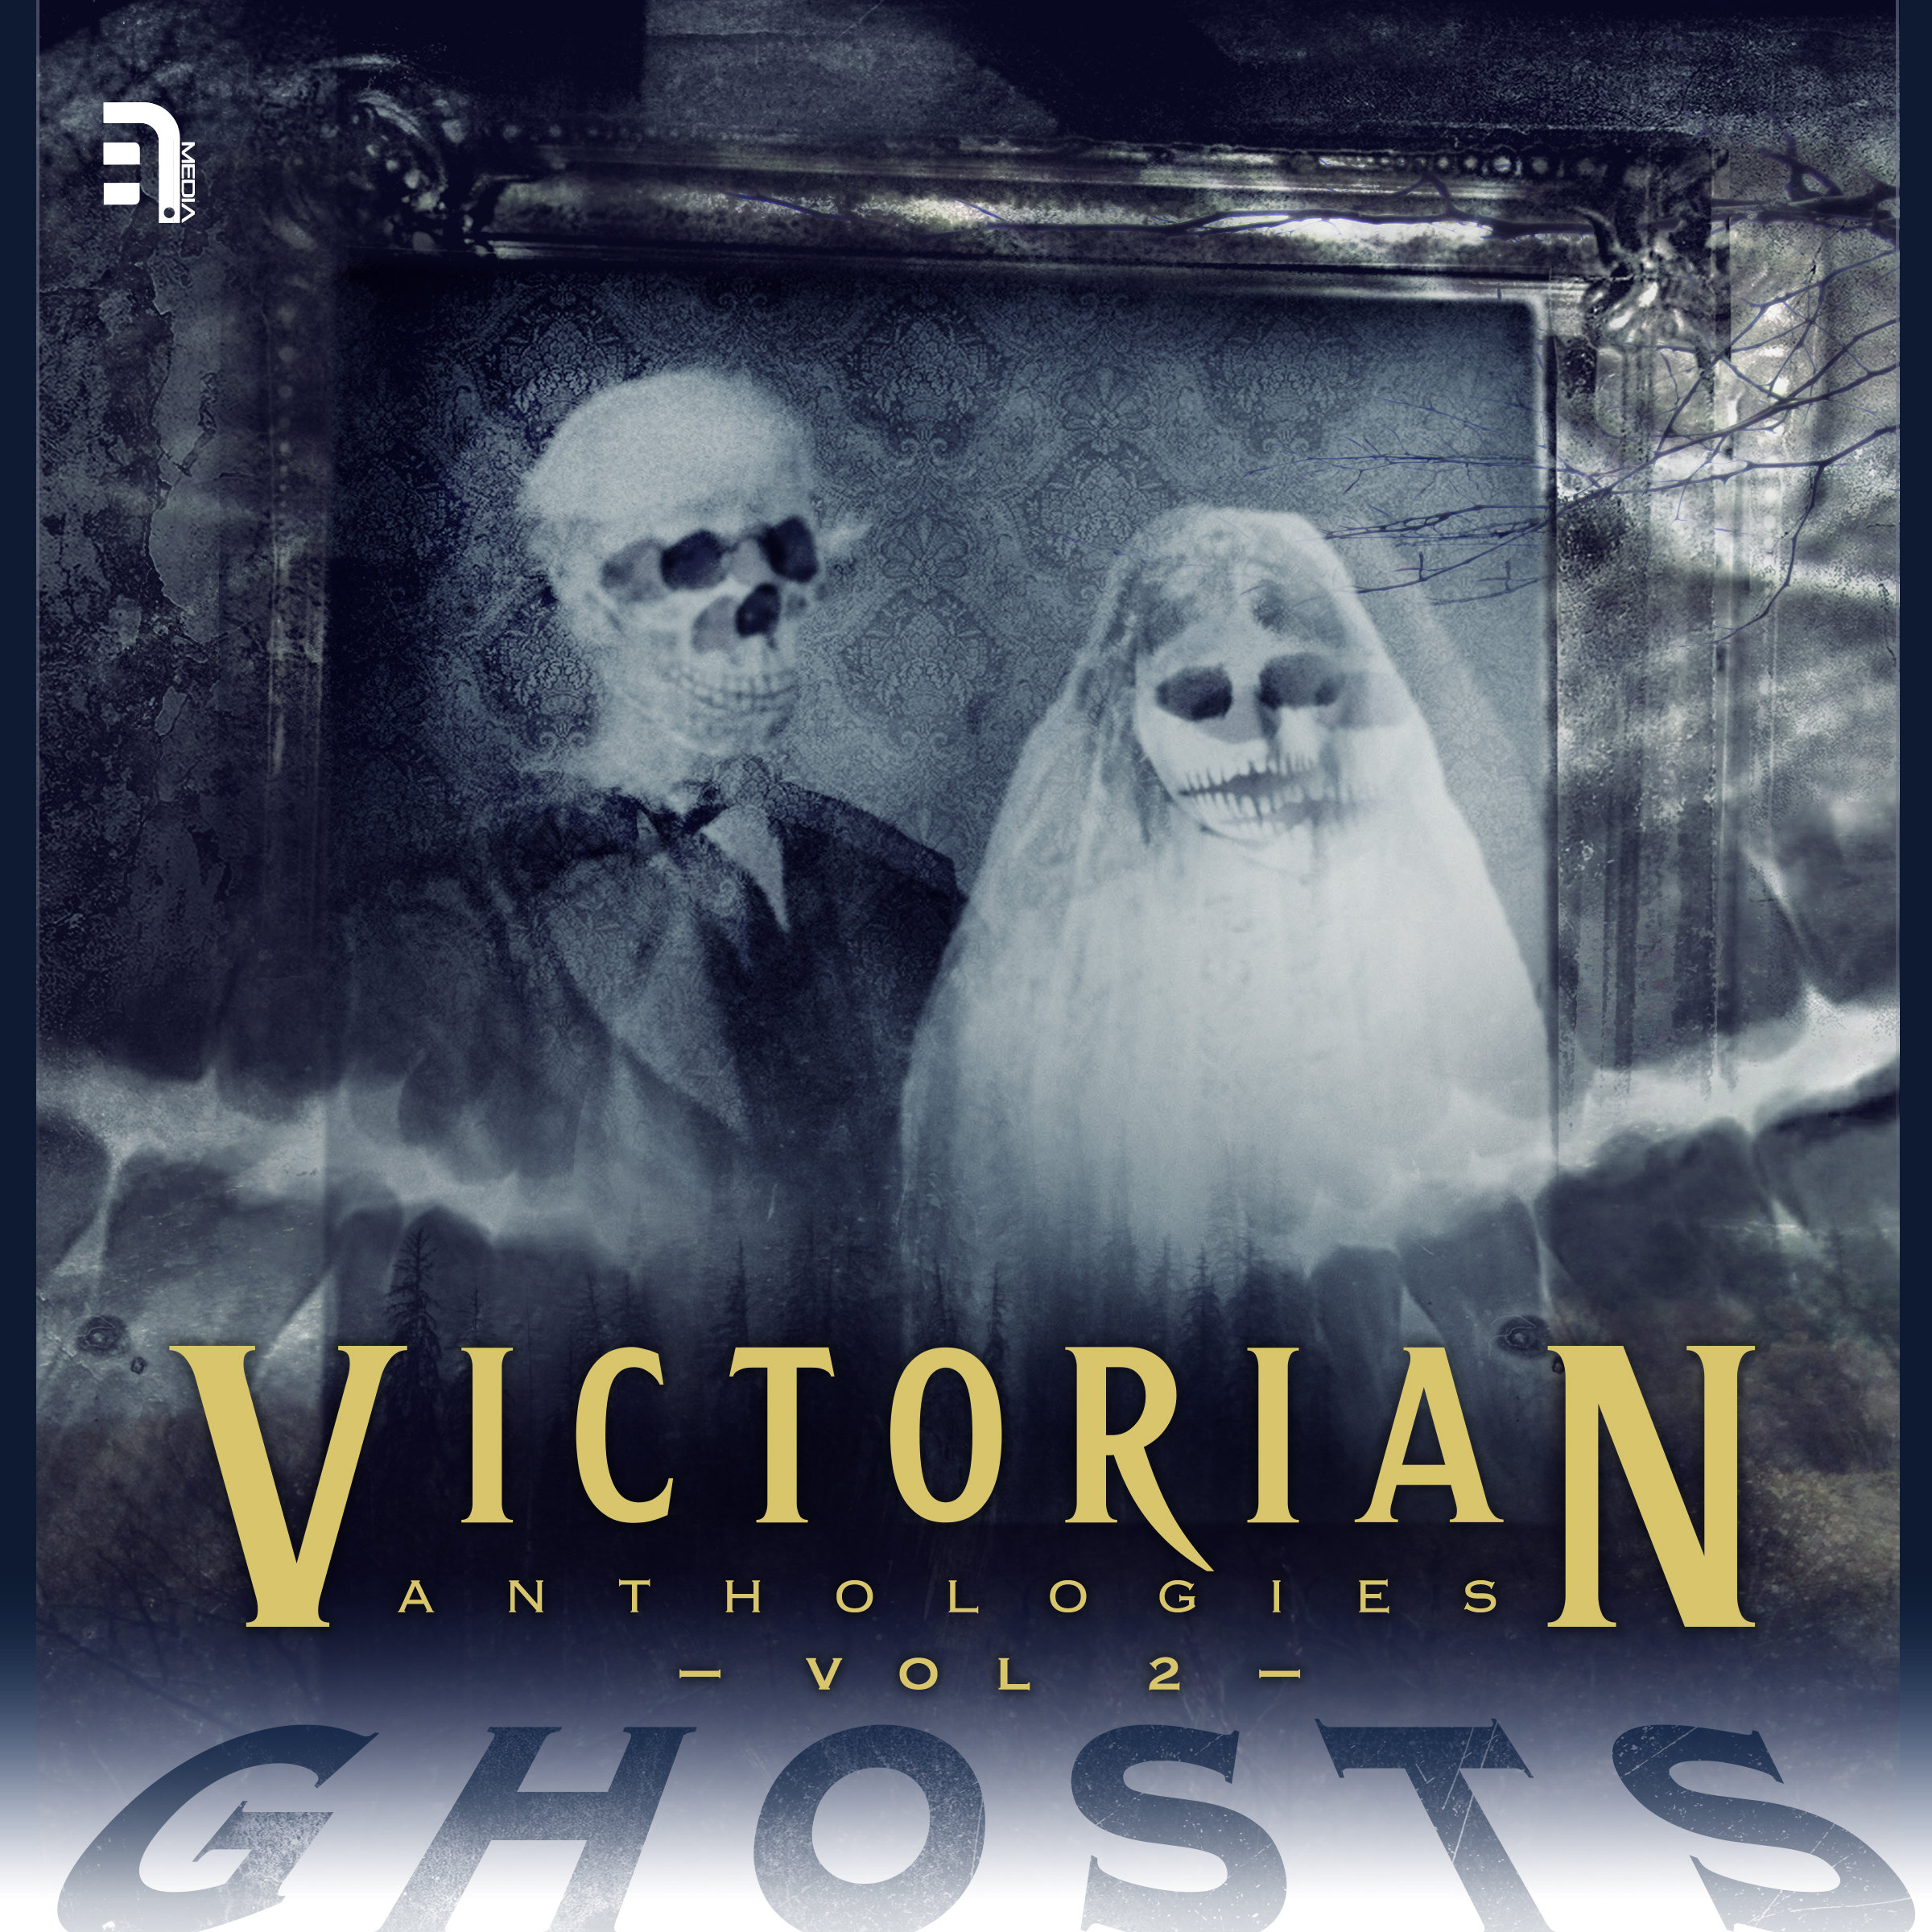 Victorian Anthologies_Ghosts_Vol 2_cover